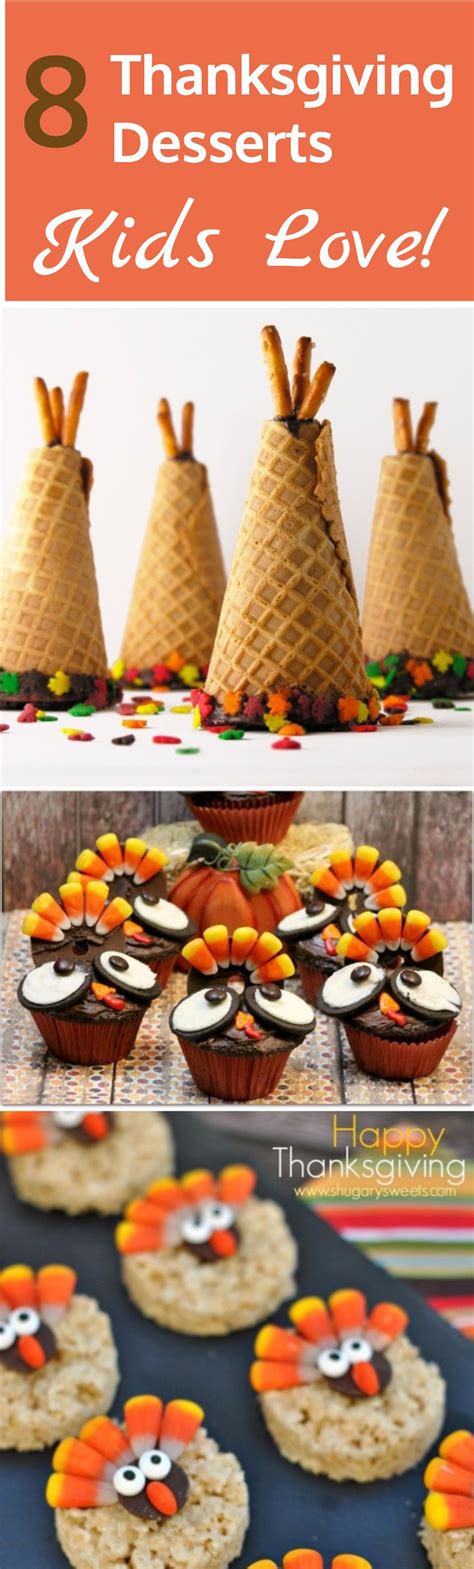 Try a couple of recipes from this lineup of kids meal ideas and ring that dinner bell, delicious is served! Thanksgiving Desserts Kids Love! | Kid desserts, Thanksgiving treats, Thanksgiving desserts